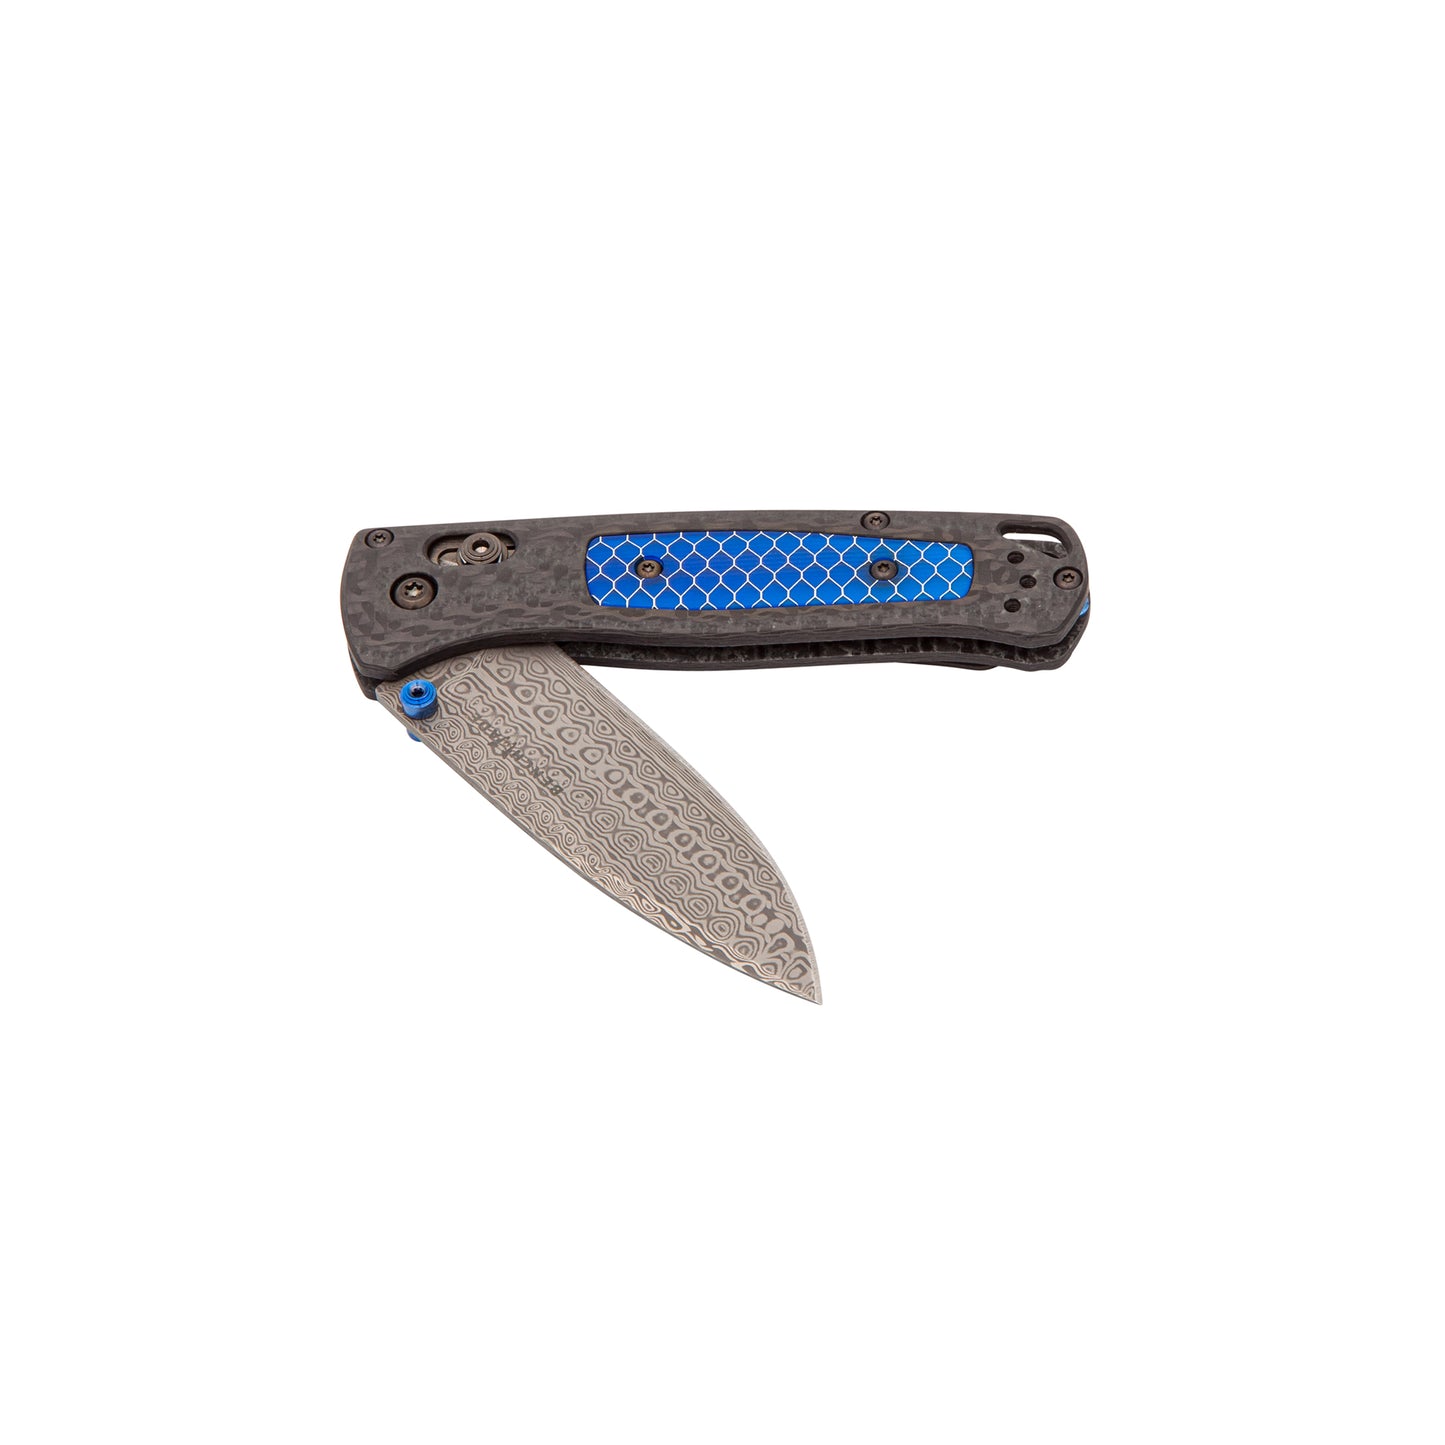 Benchmade Bugout 535-191 limited halb offen